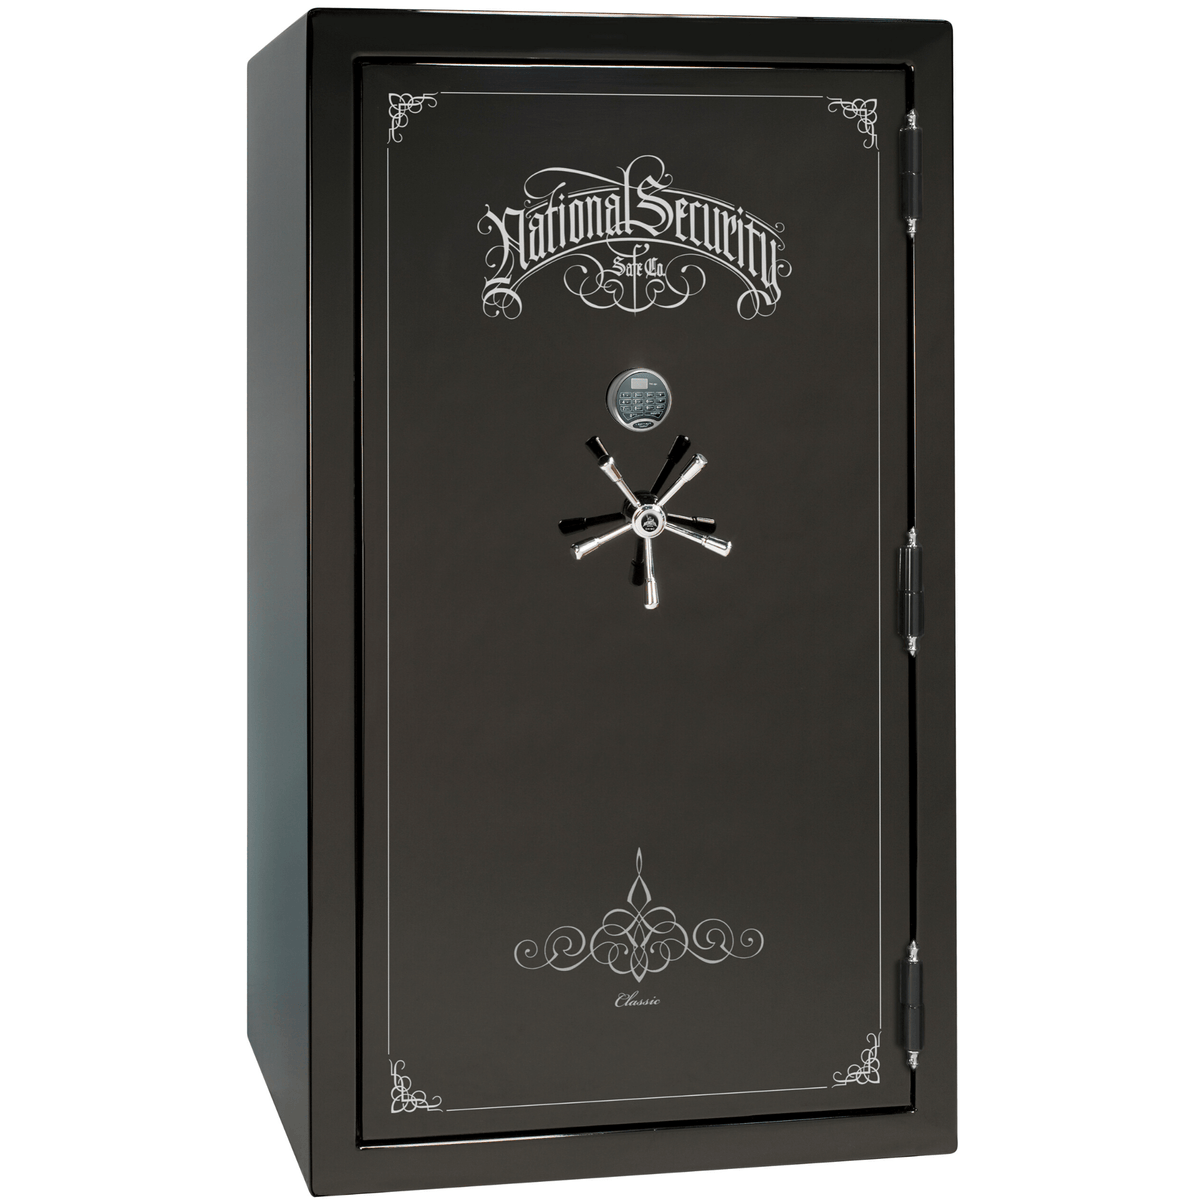 Liberty Safe Classic Plus 50 in Black Gloss with Chrome Electronic Lock, closed door.